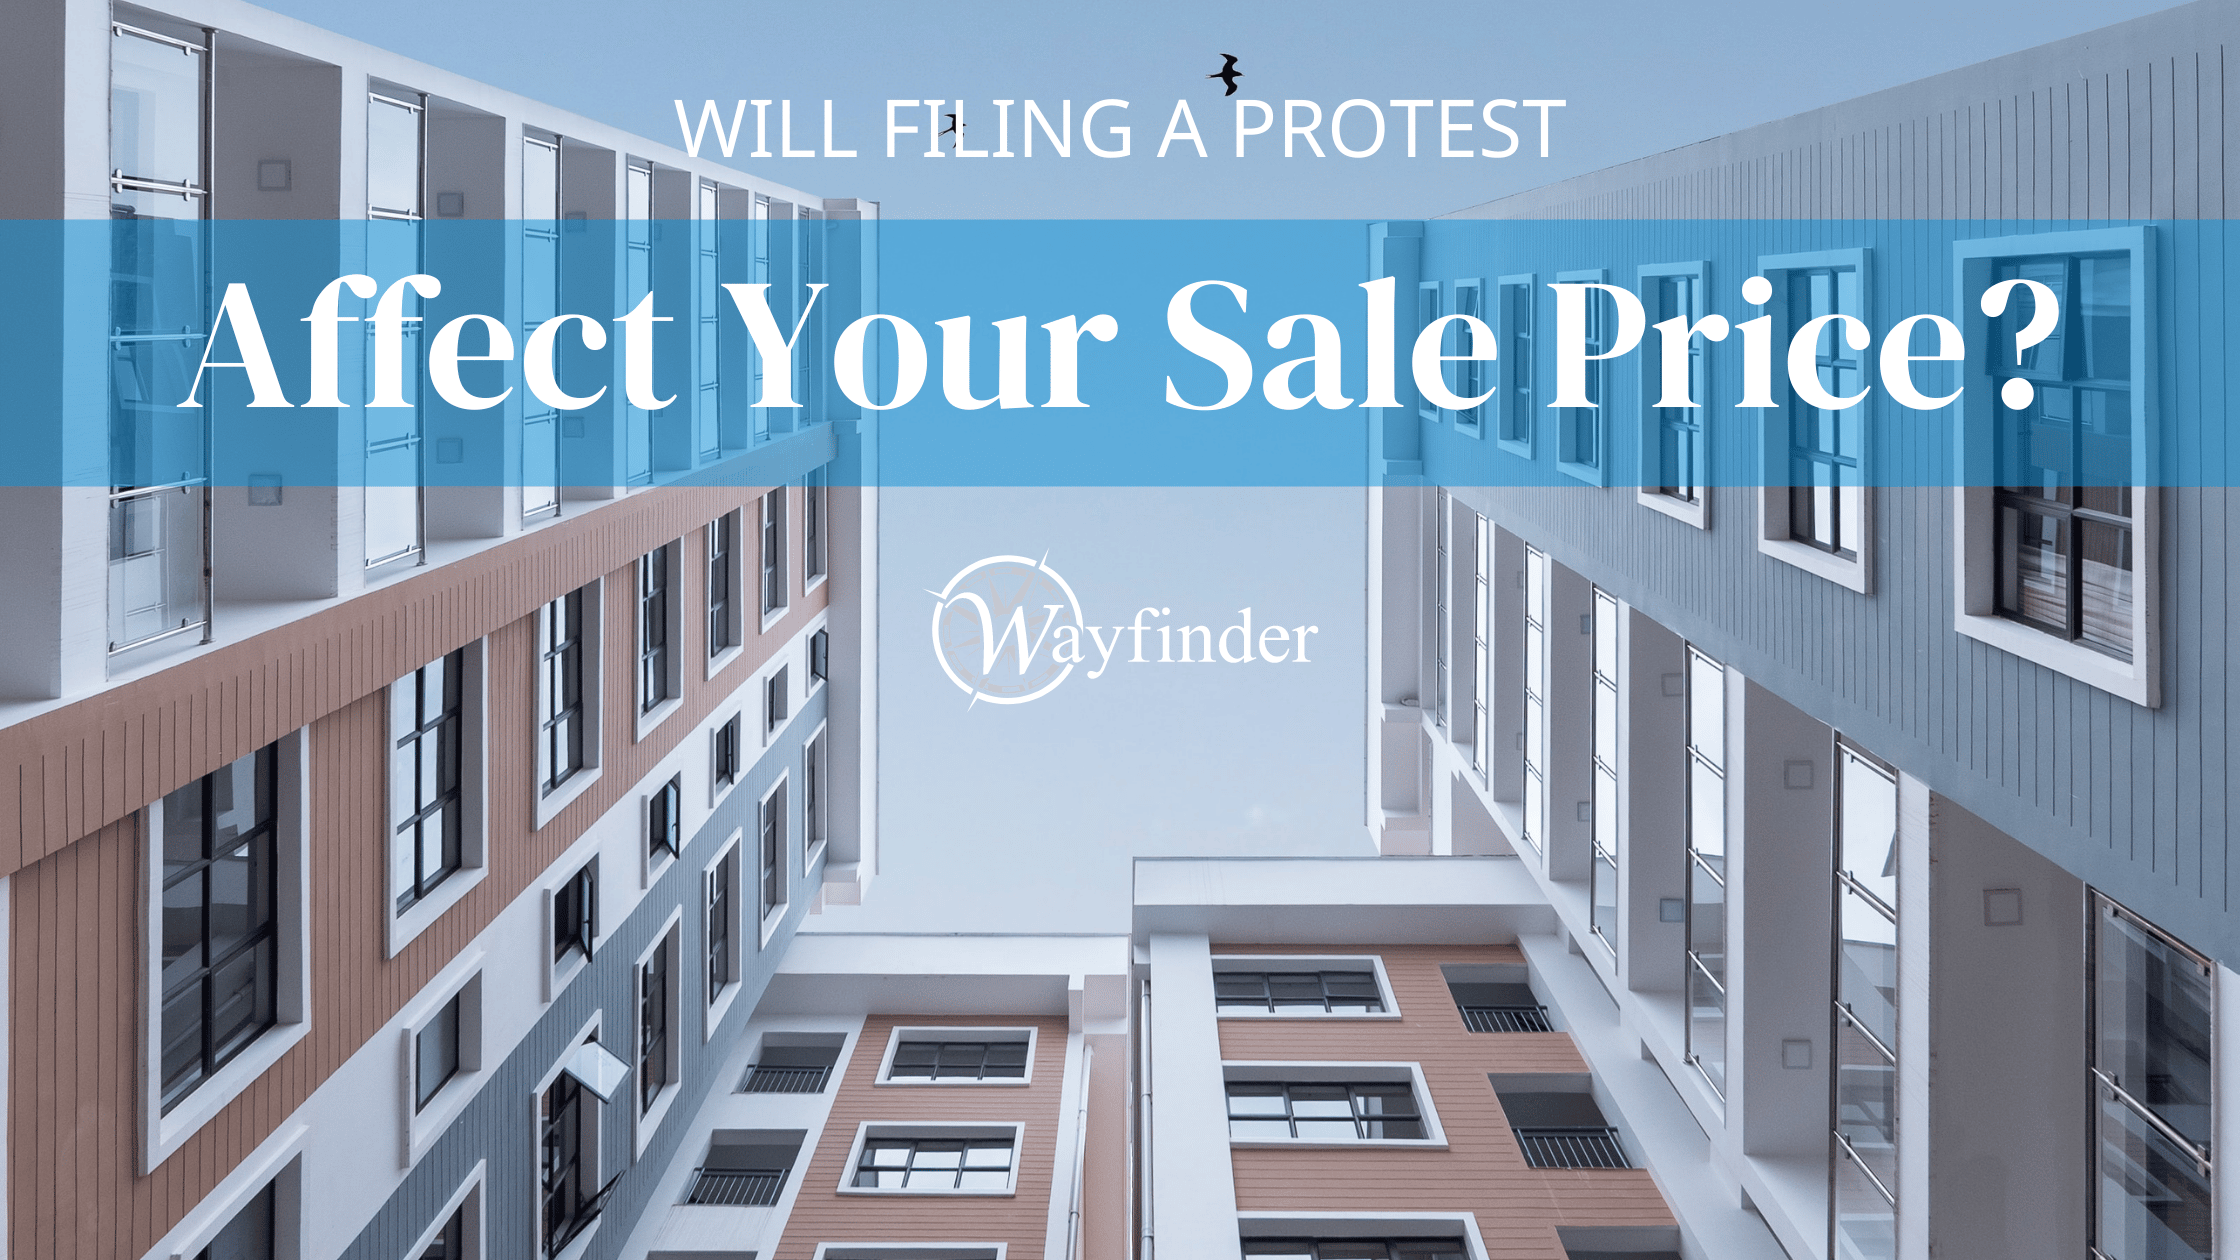 Will Filing a Property Tax Protest Affect My Sale Price